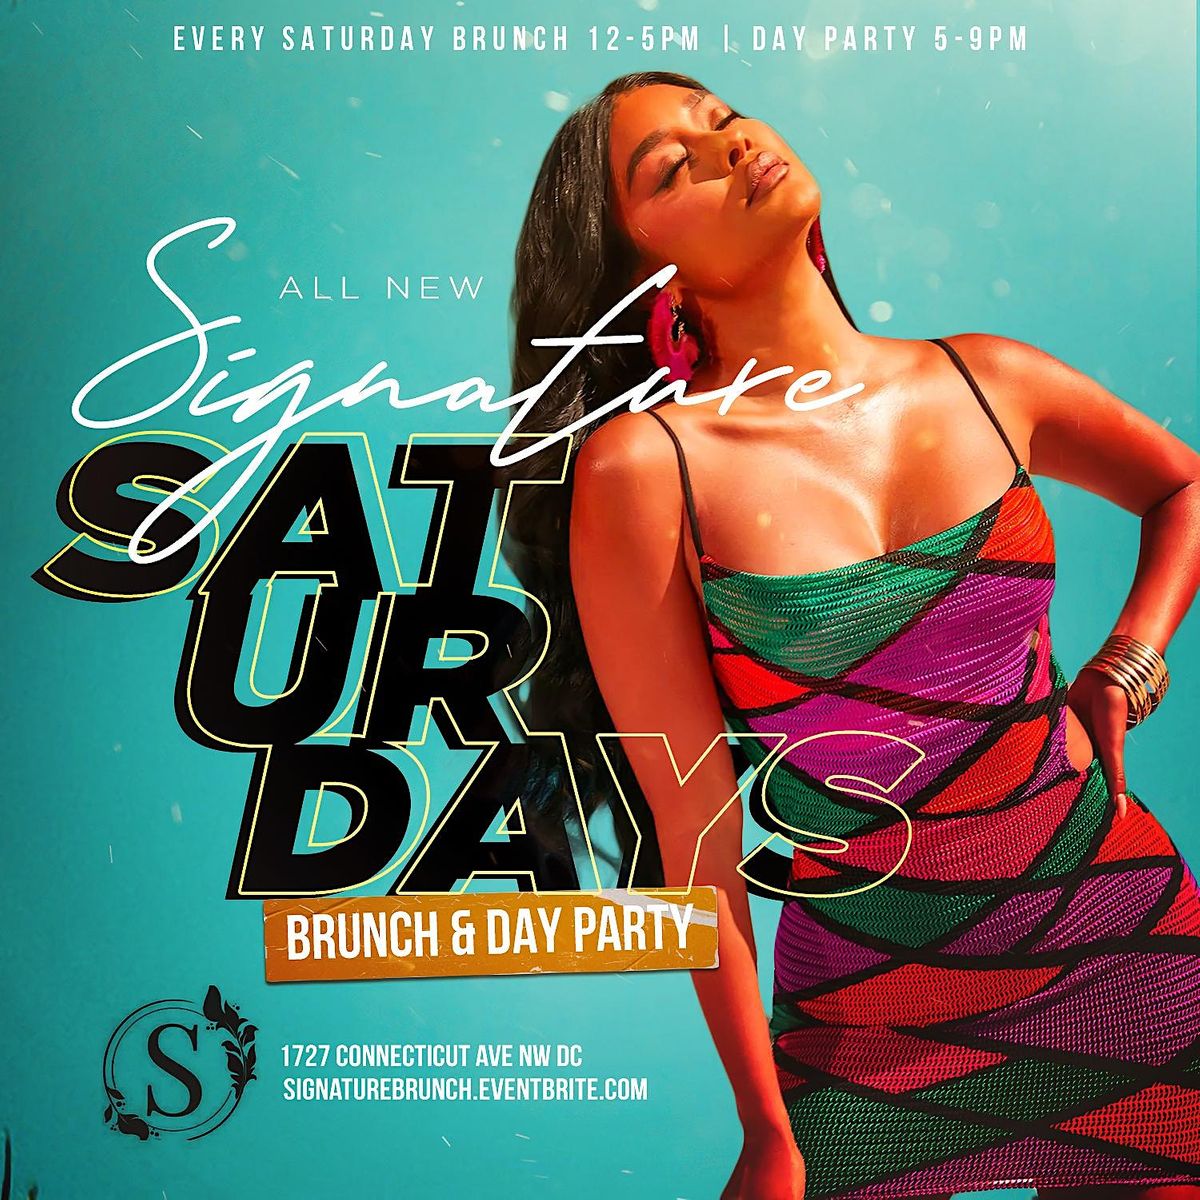 All New Signature Saturdays Brunch and Day Party